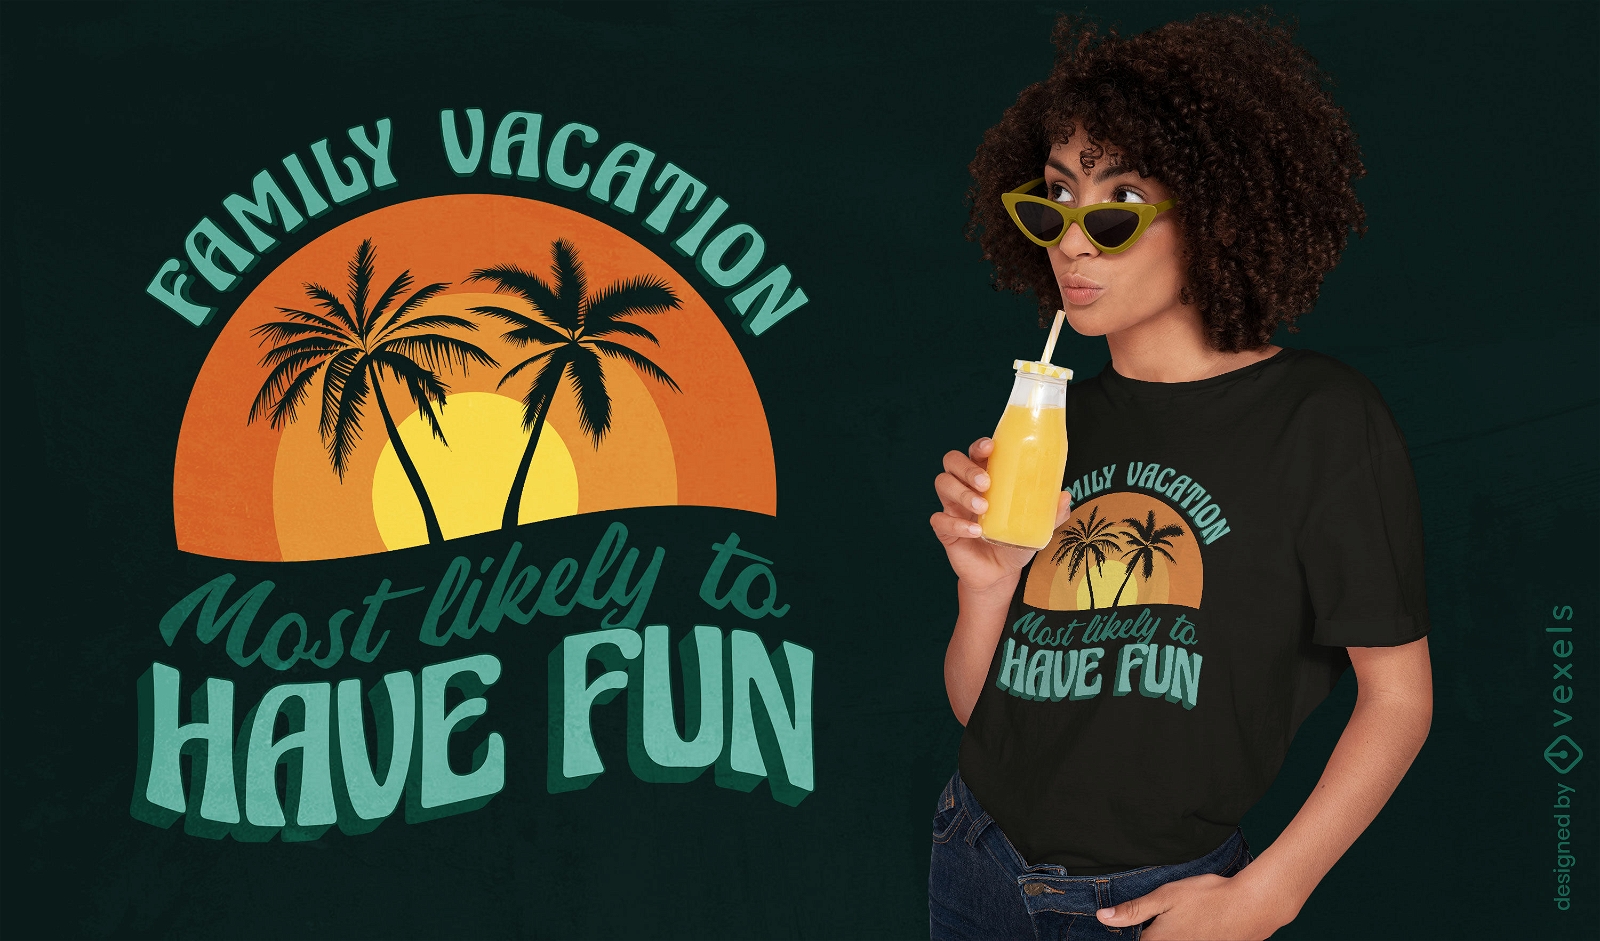 Family vacation must weekly to have fun t-shirt design